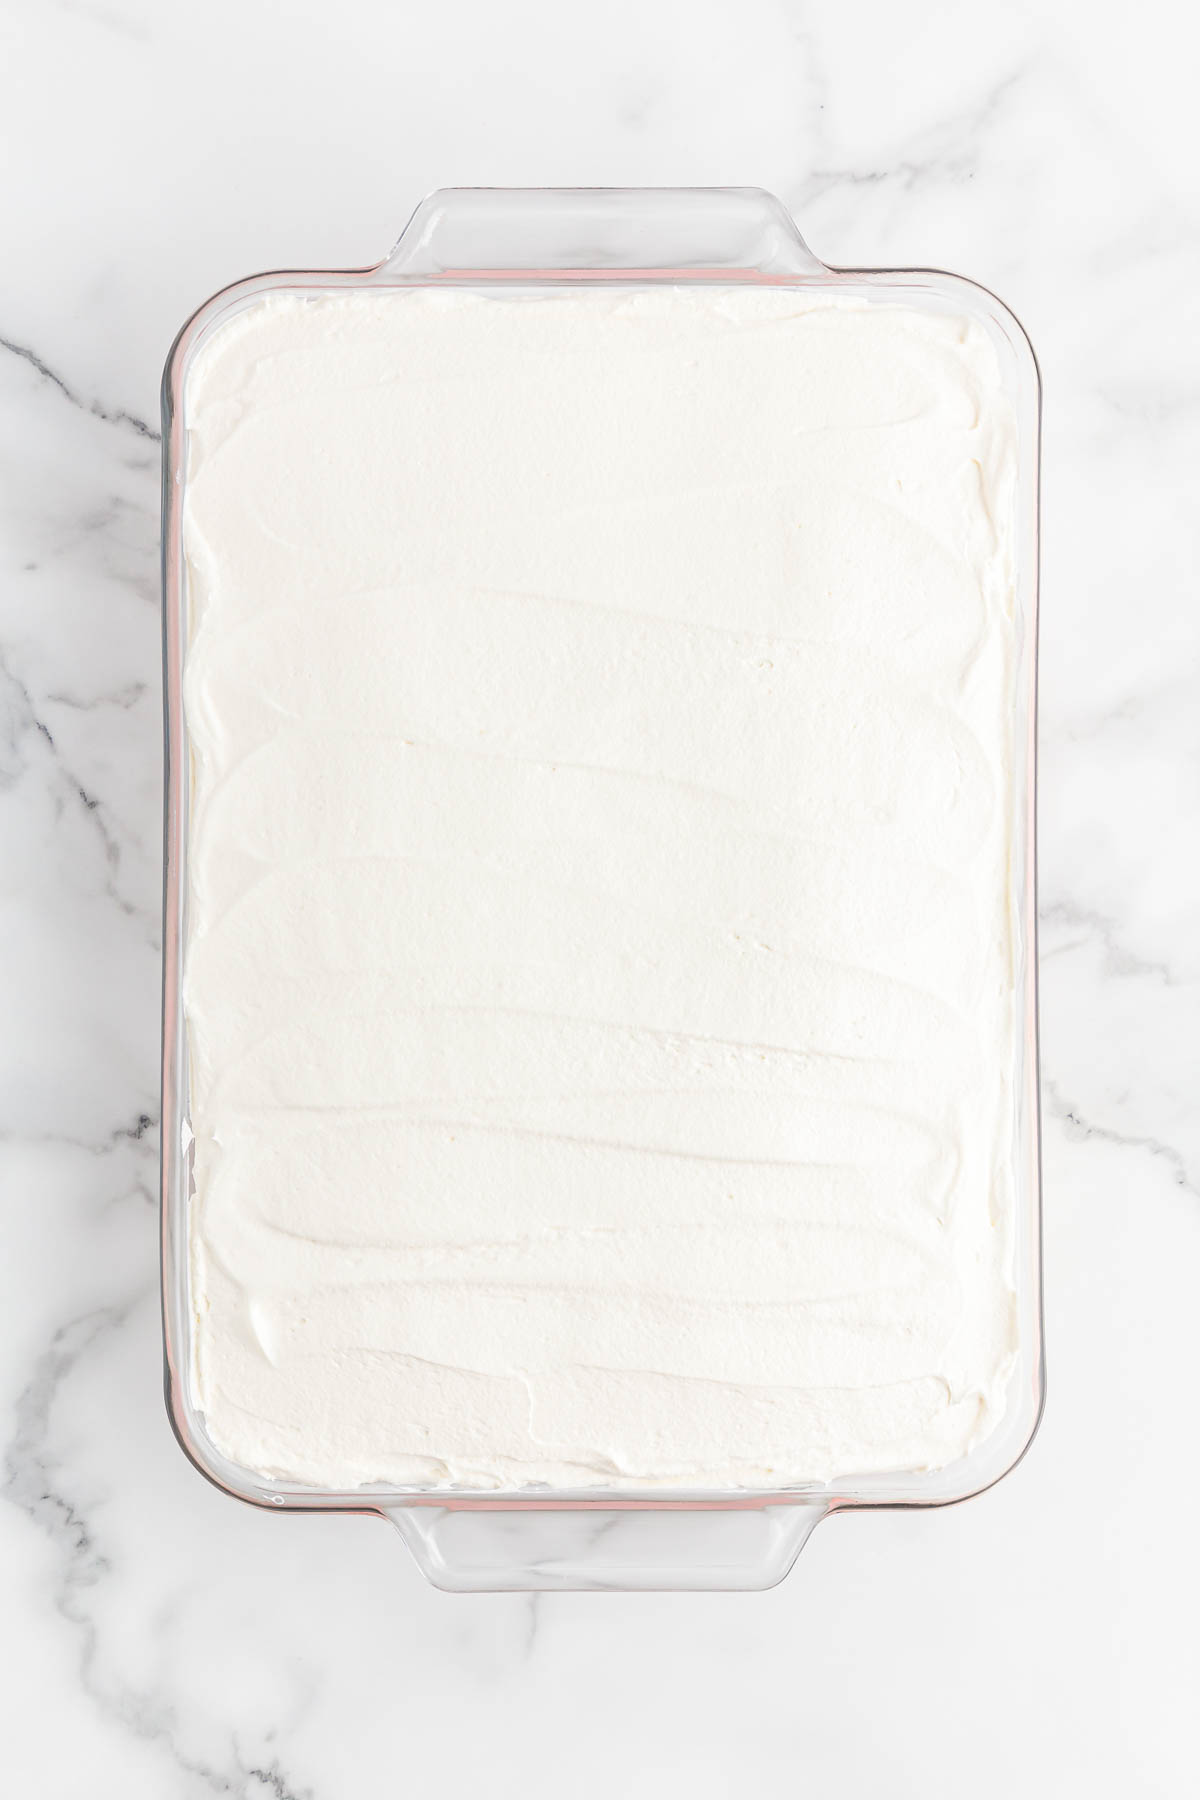 Cool Whip layer for strawberry lush